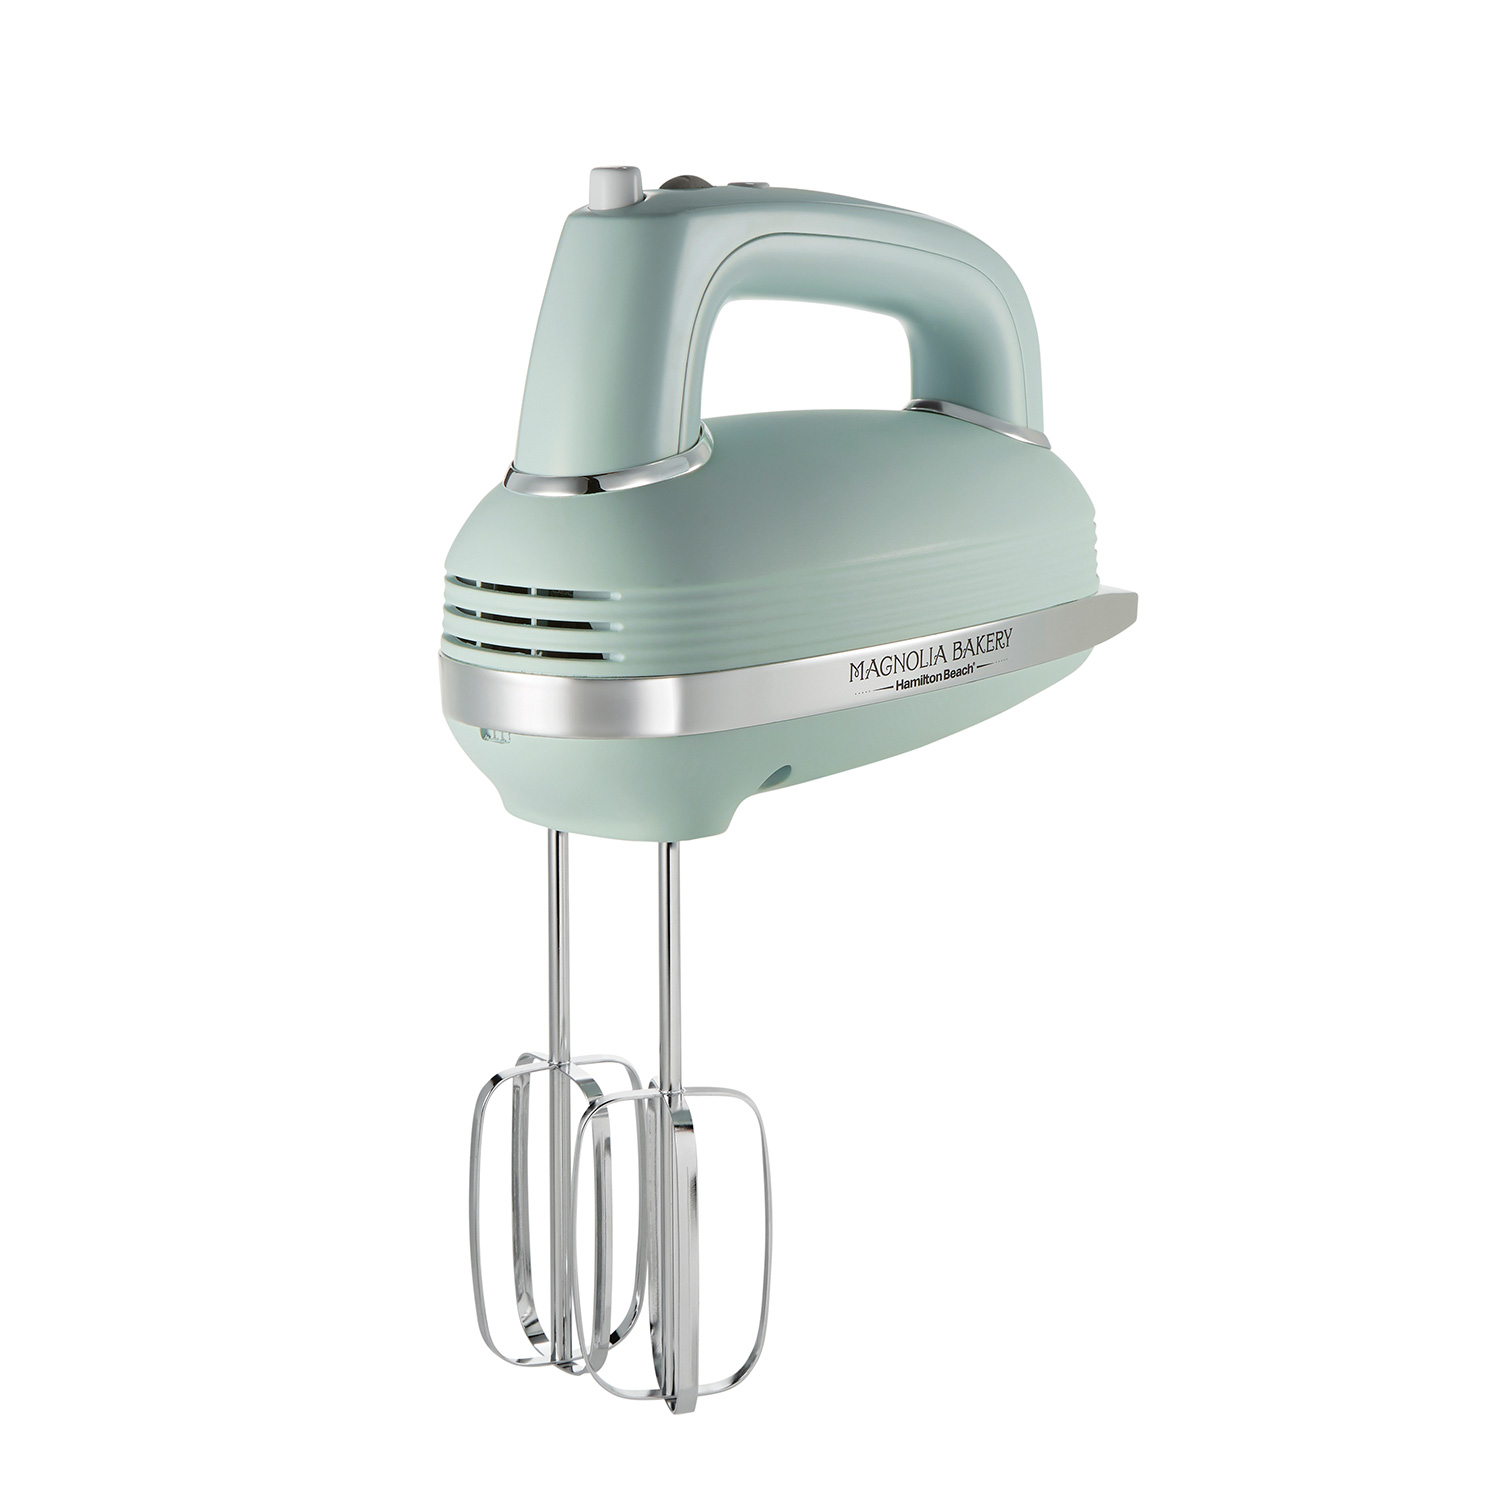 Purchase Magnolia Bakery 5 Speed Hand Mixer now